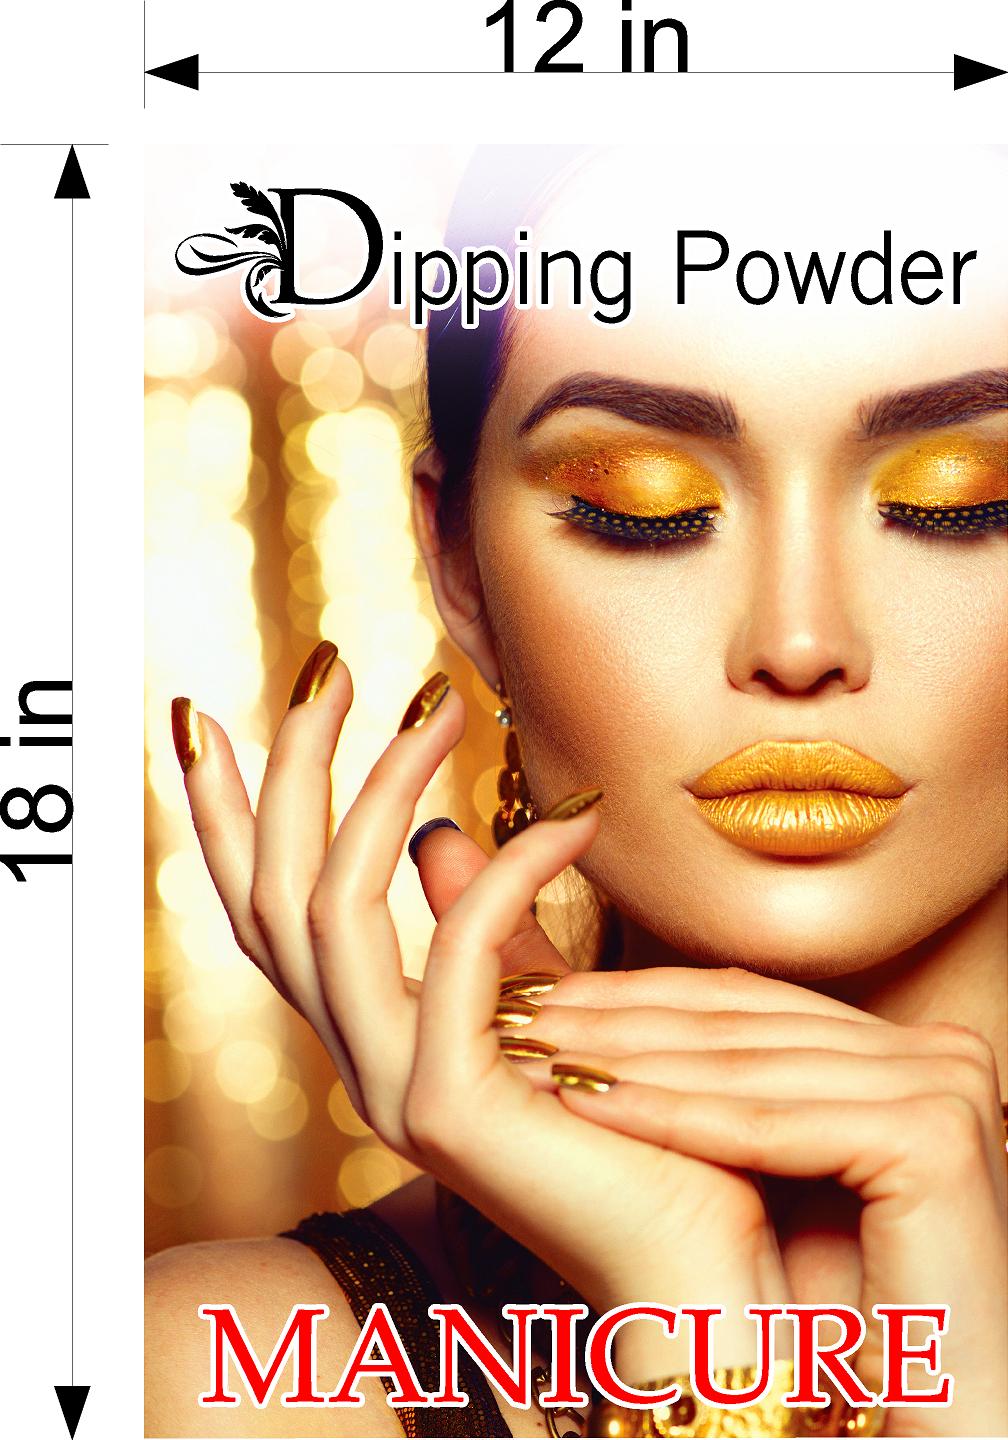 Dipping Powder 02 Wallpaper Poster Decal with Adhesive Backing Wall Sticker Decor Nail Salon Sign Vertical